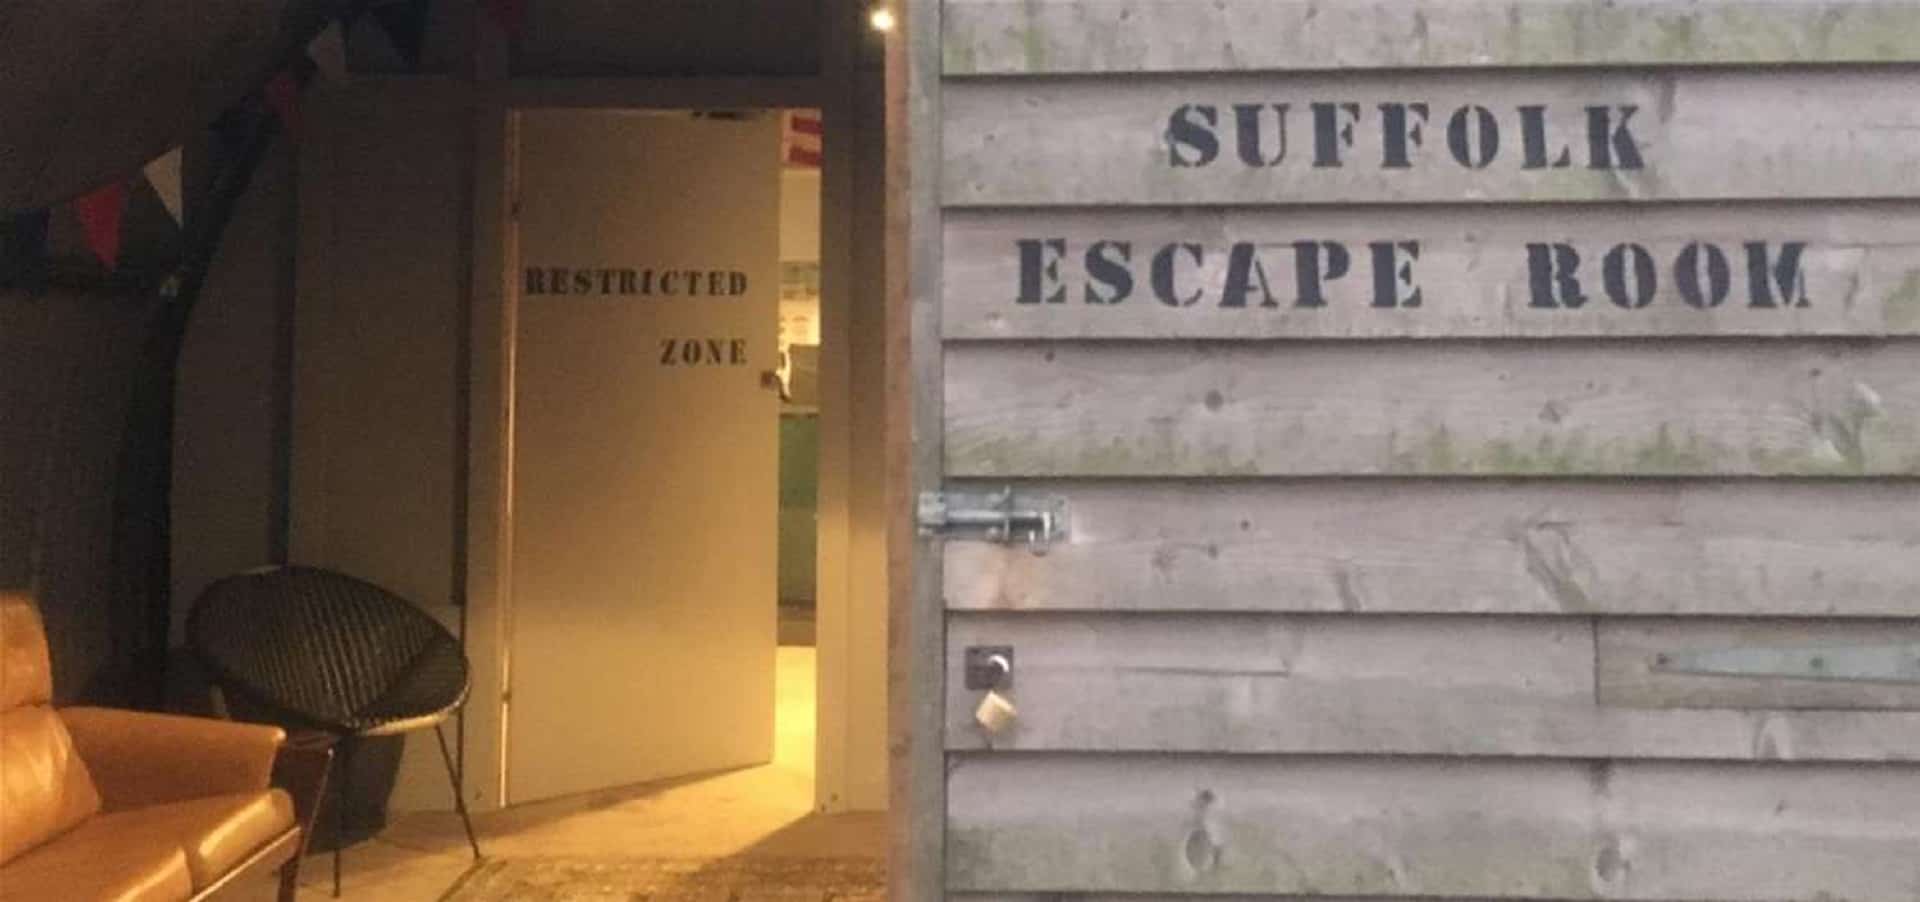 Escape Rooms Suffolk in UK